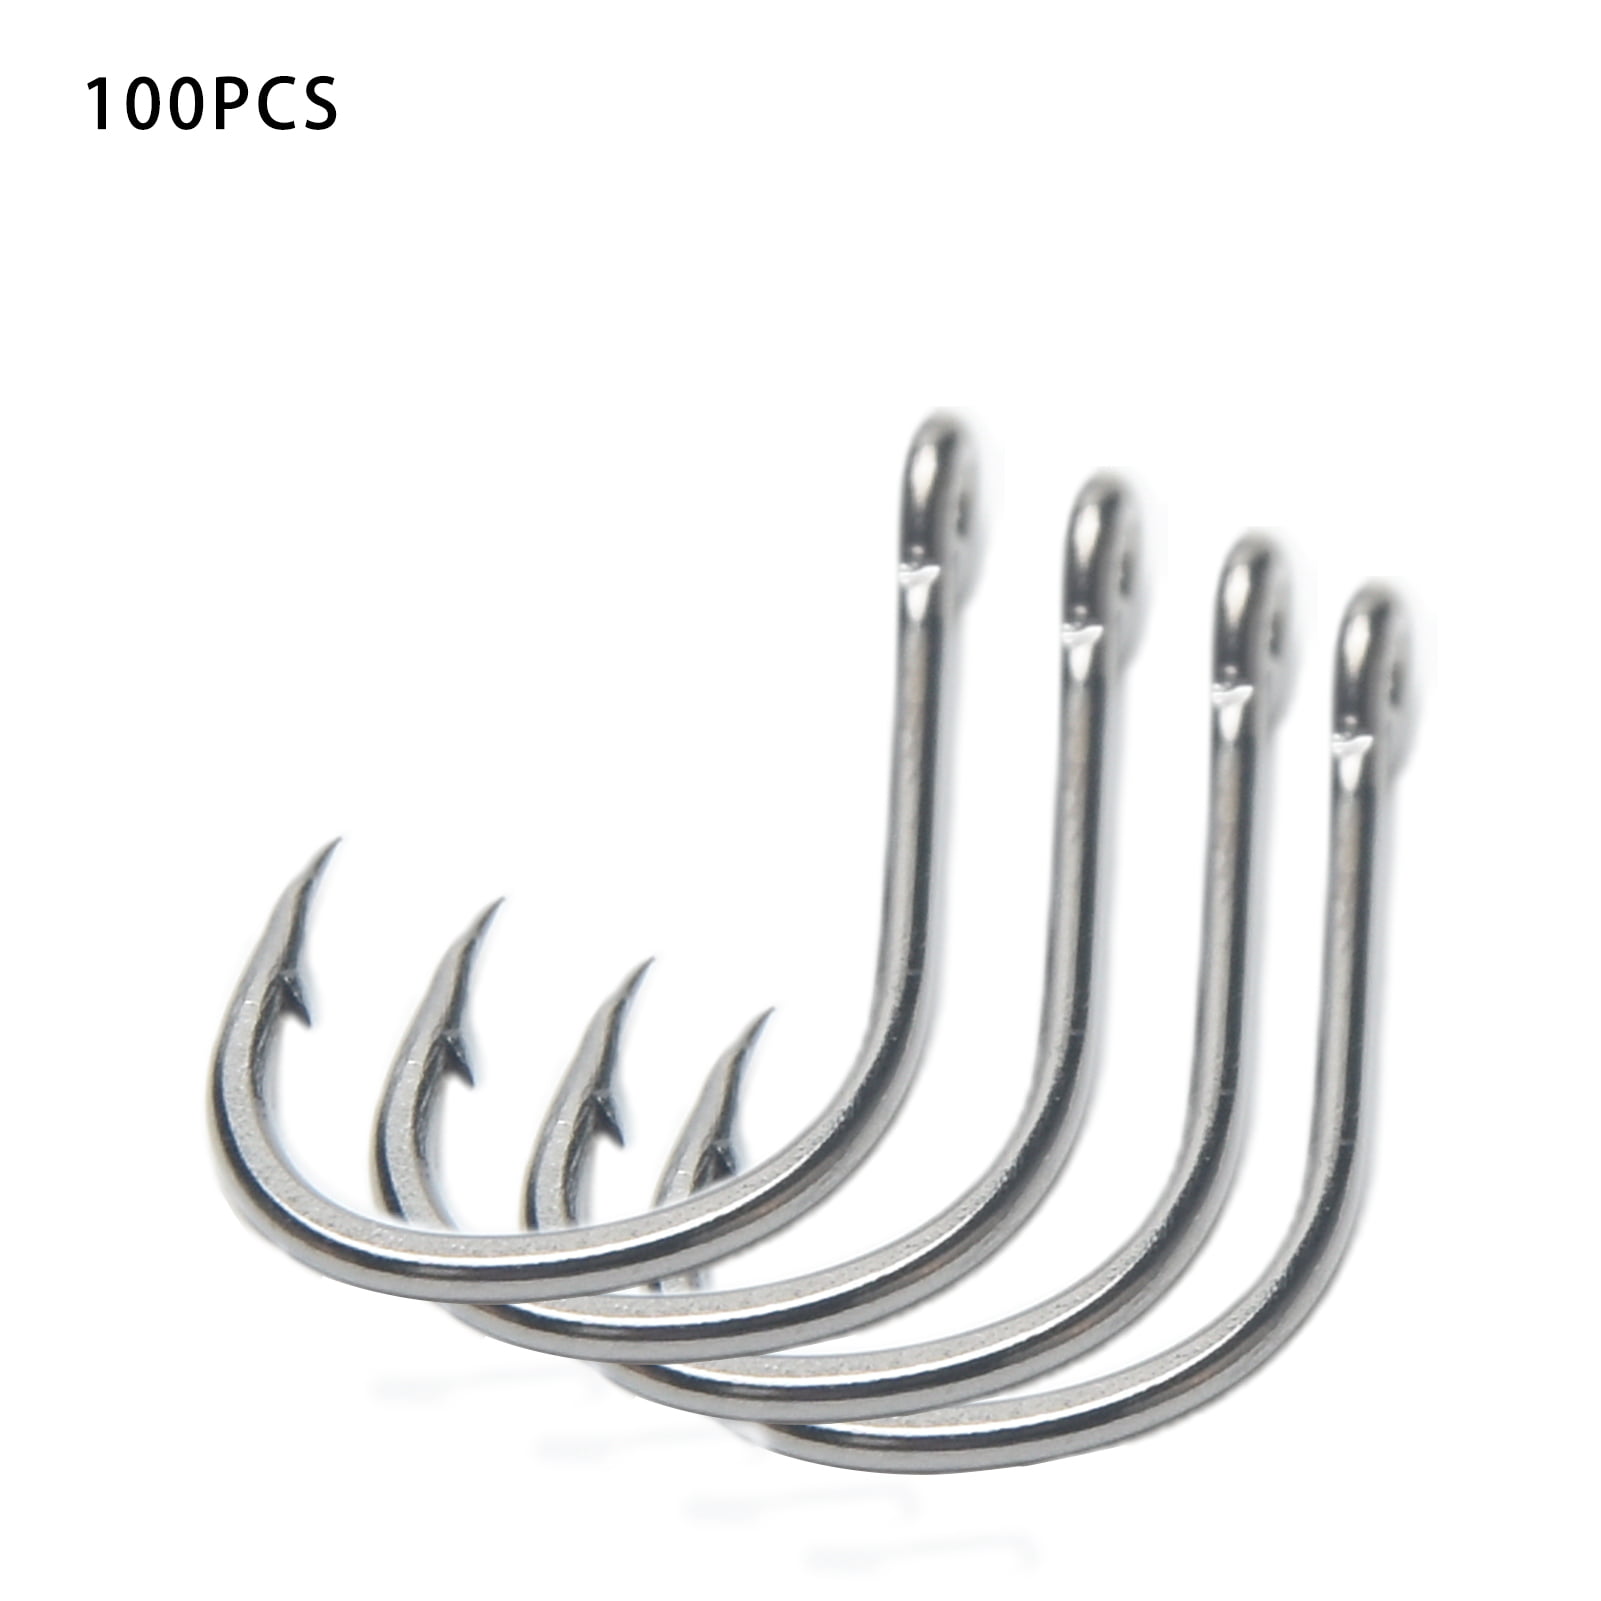 100pcs/Lot High Carbon Steel Fishing Hooks Sharpened Fishing Hook With Box   rx 